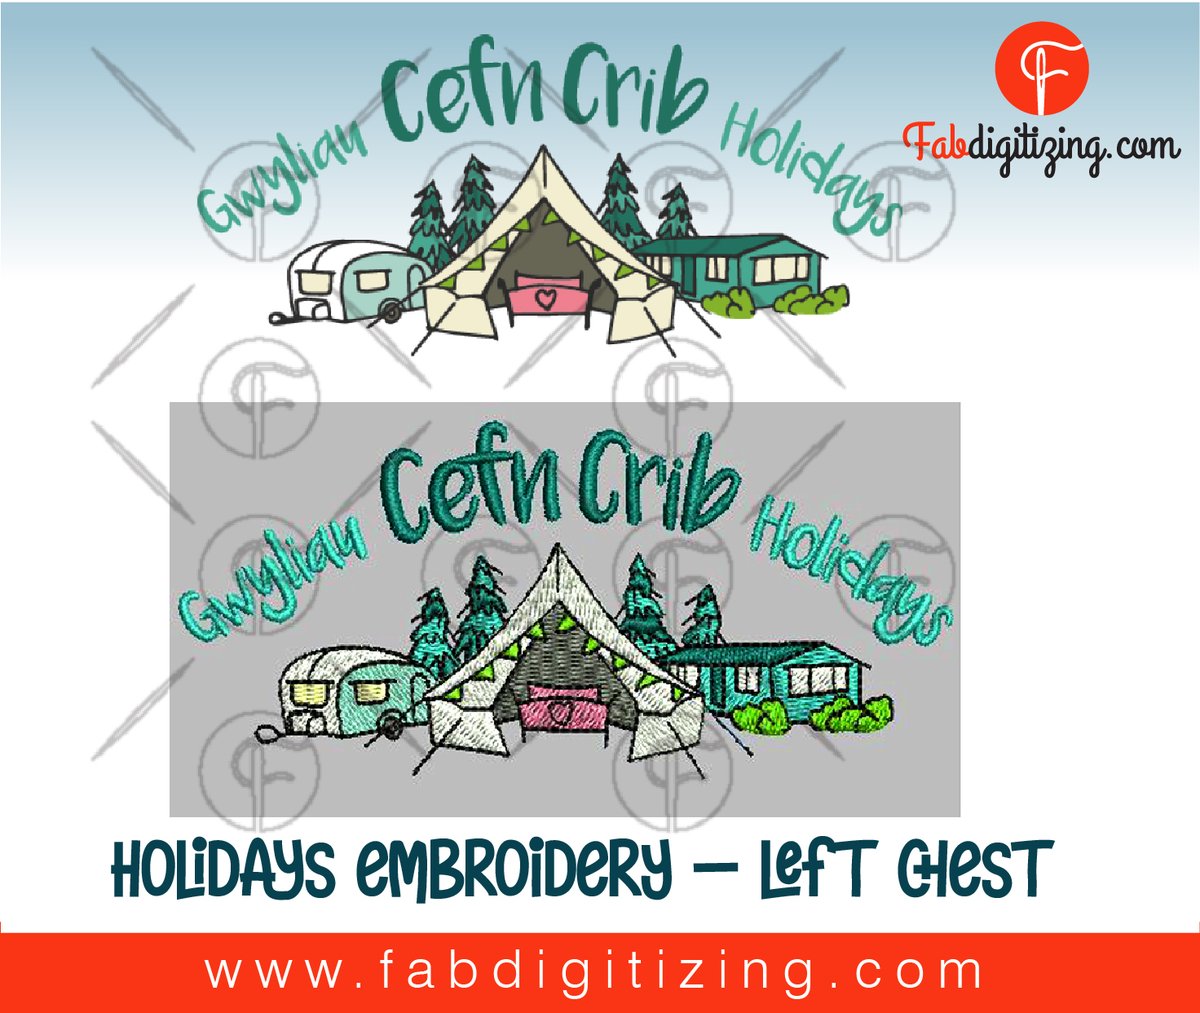 Holidays embroidery - left chest
#CustomEmbroidery #EmbroideryArt #StitchingLove #PersonalizedEmbroidery #ThreadMagic #EmbroideryDesigns #NeedleAndThread #HandmadeEmbroidery #CustomStitching
#EmbroideryHoops #CraftyHands #EmbroideryAddict #UniqueStitches #ThreadCraft